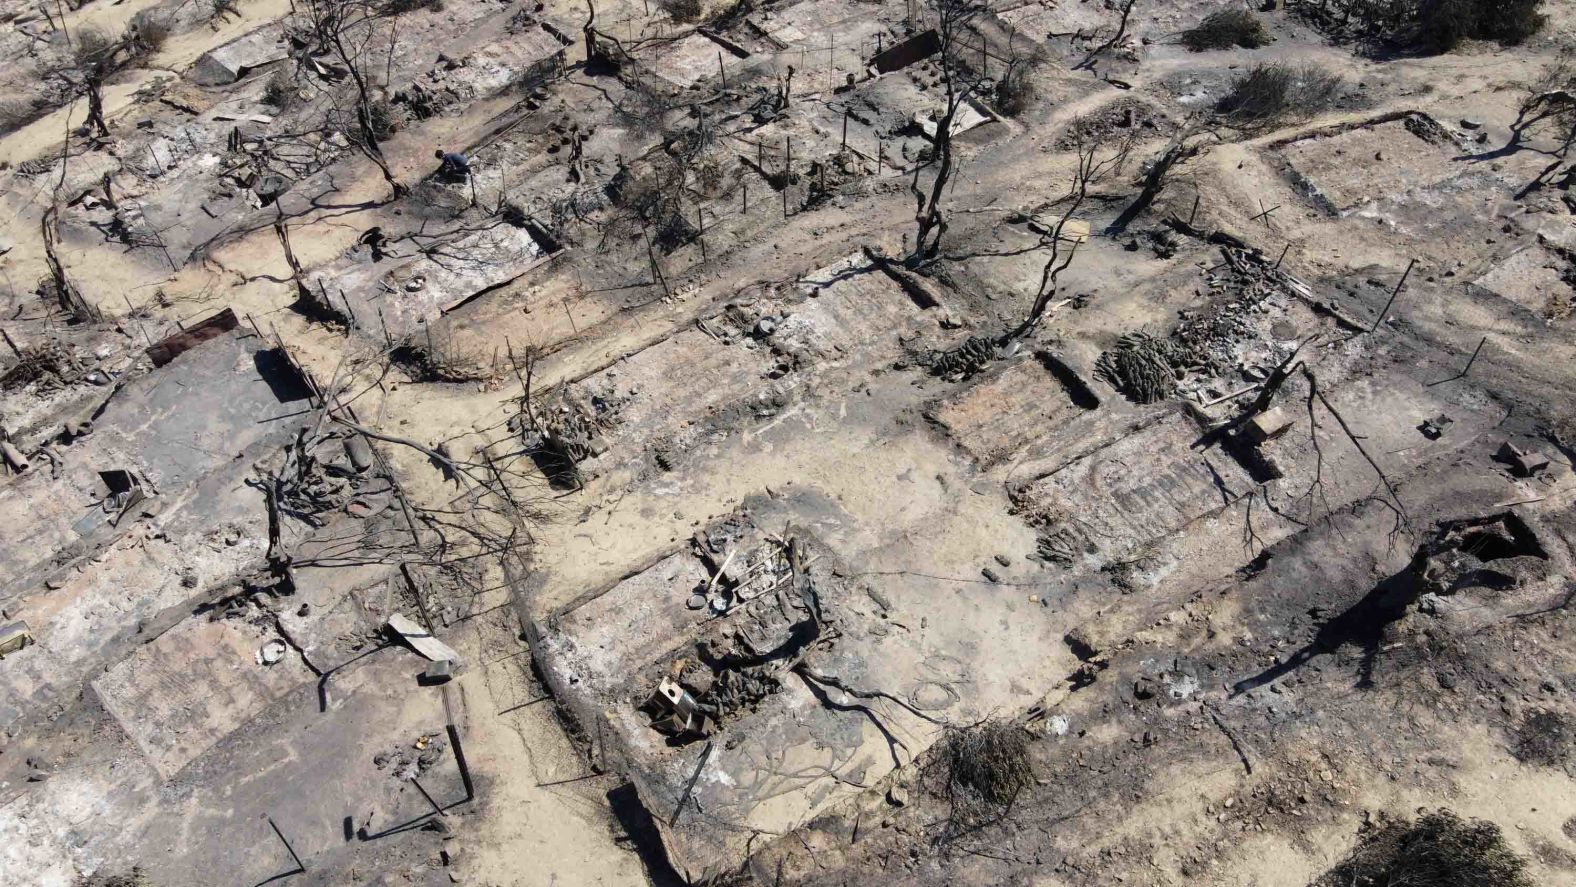 An aerial view shows destroyed shelters.